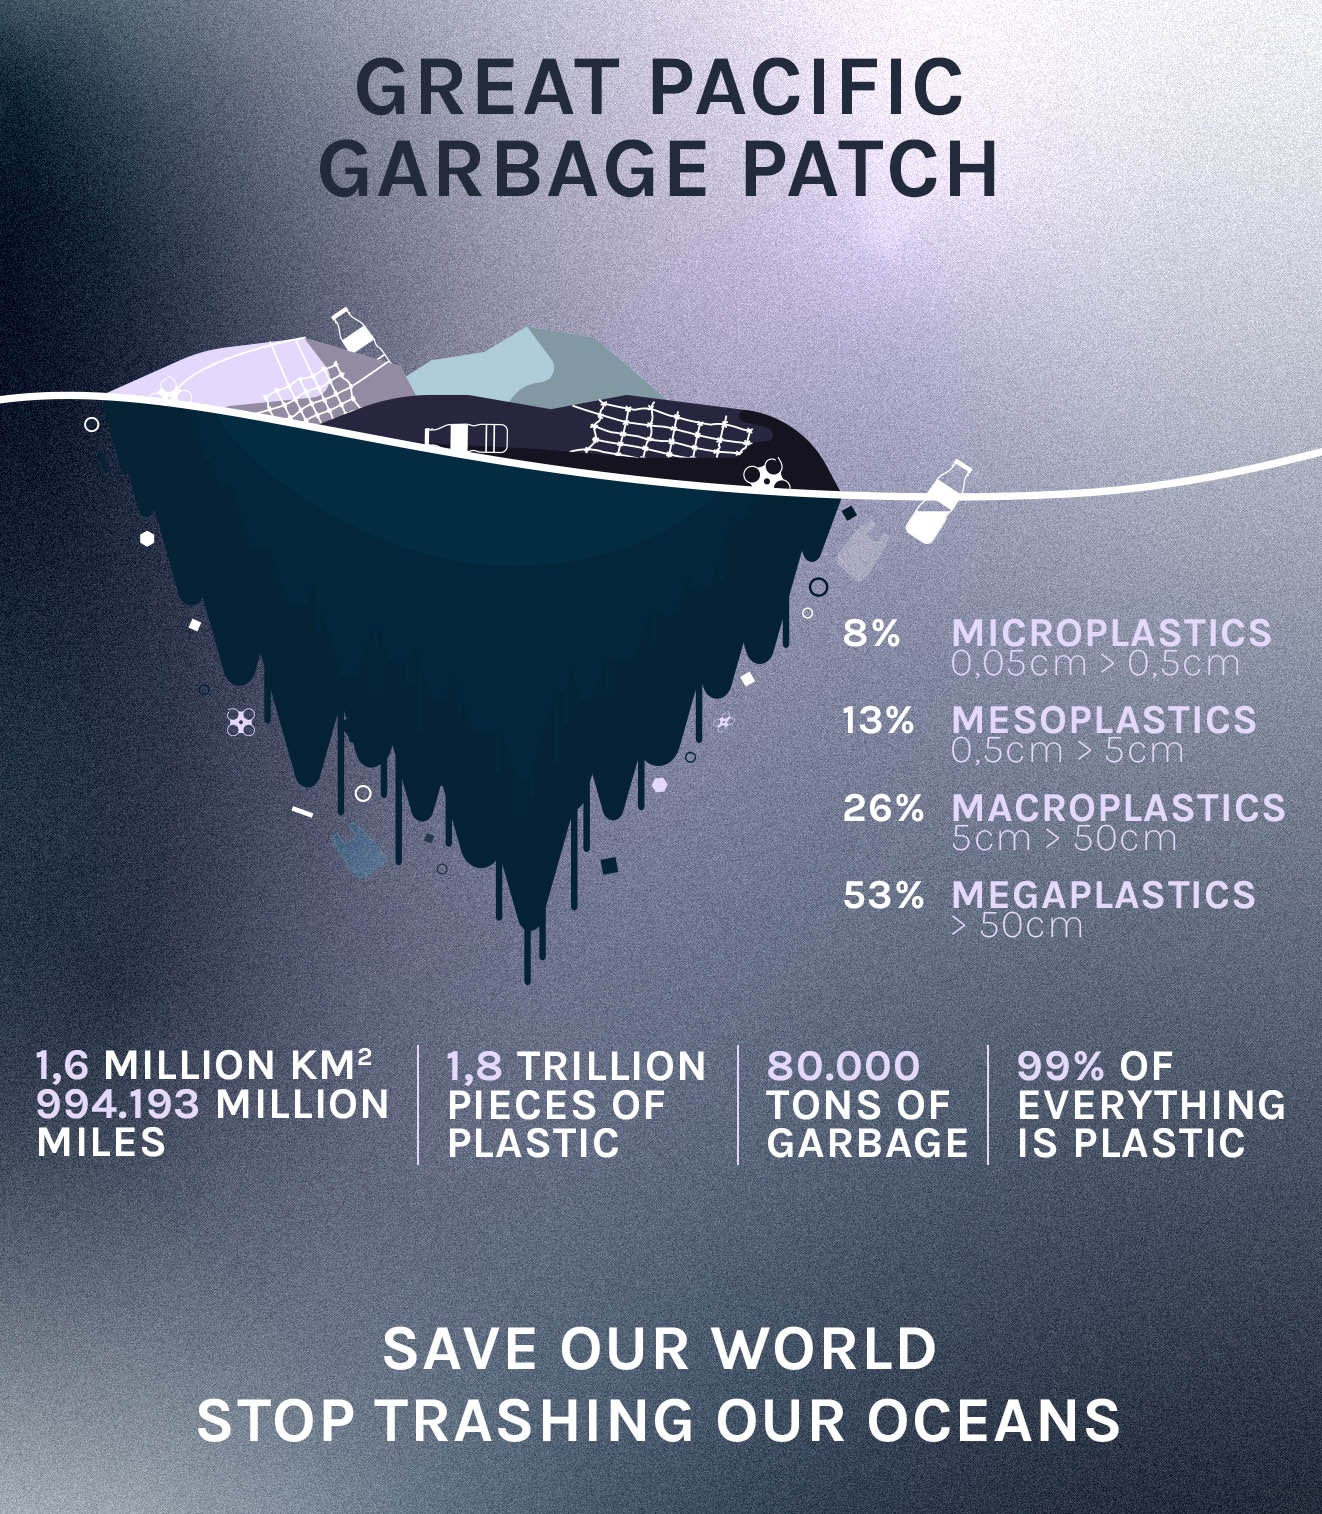 The biggest of 5 ocean garbage patches